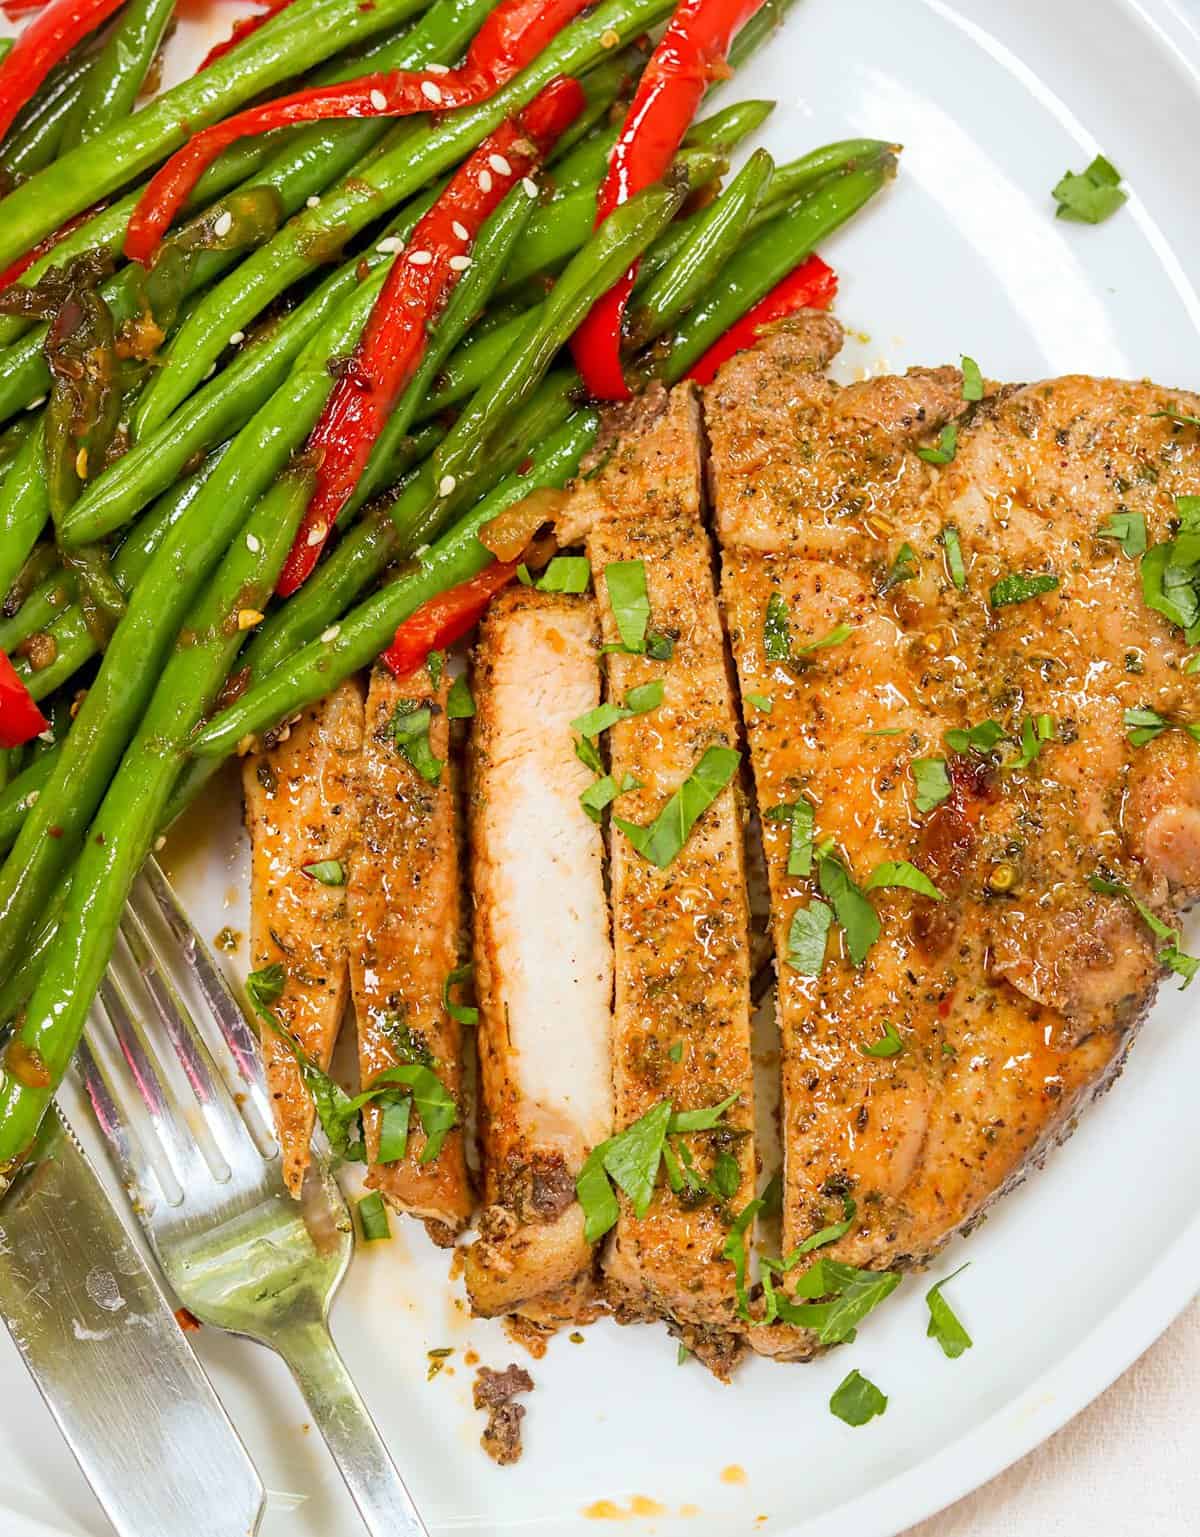 Enjoying straightforward 4-Ingredient Oven-Baked Pork Chops with roasted green beans and red peppers